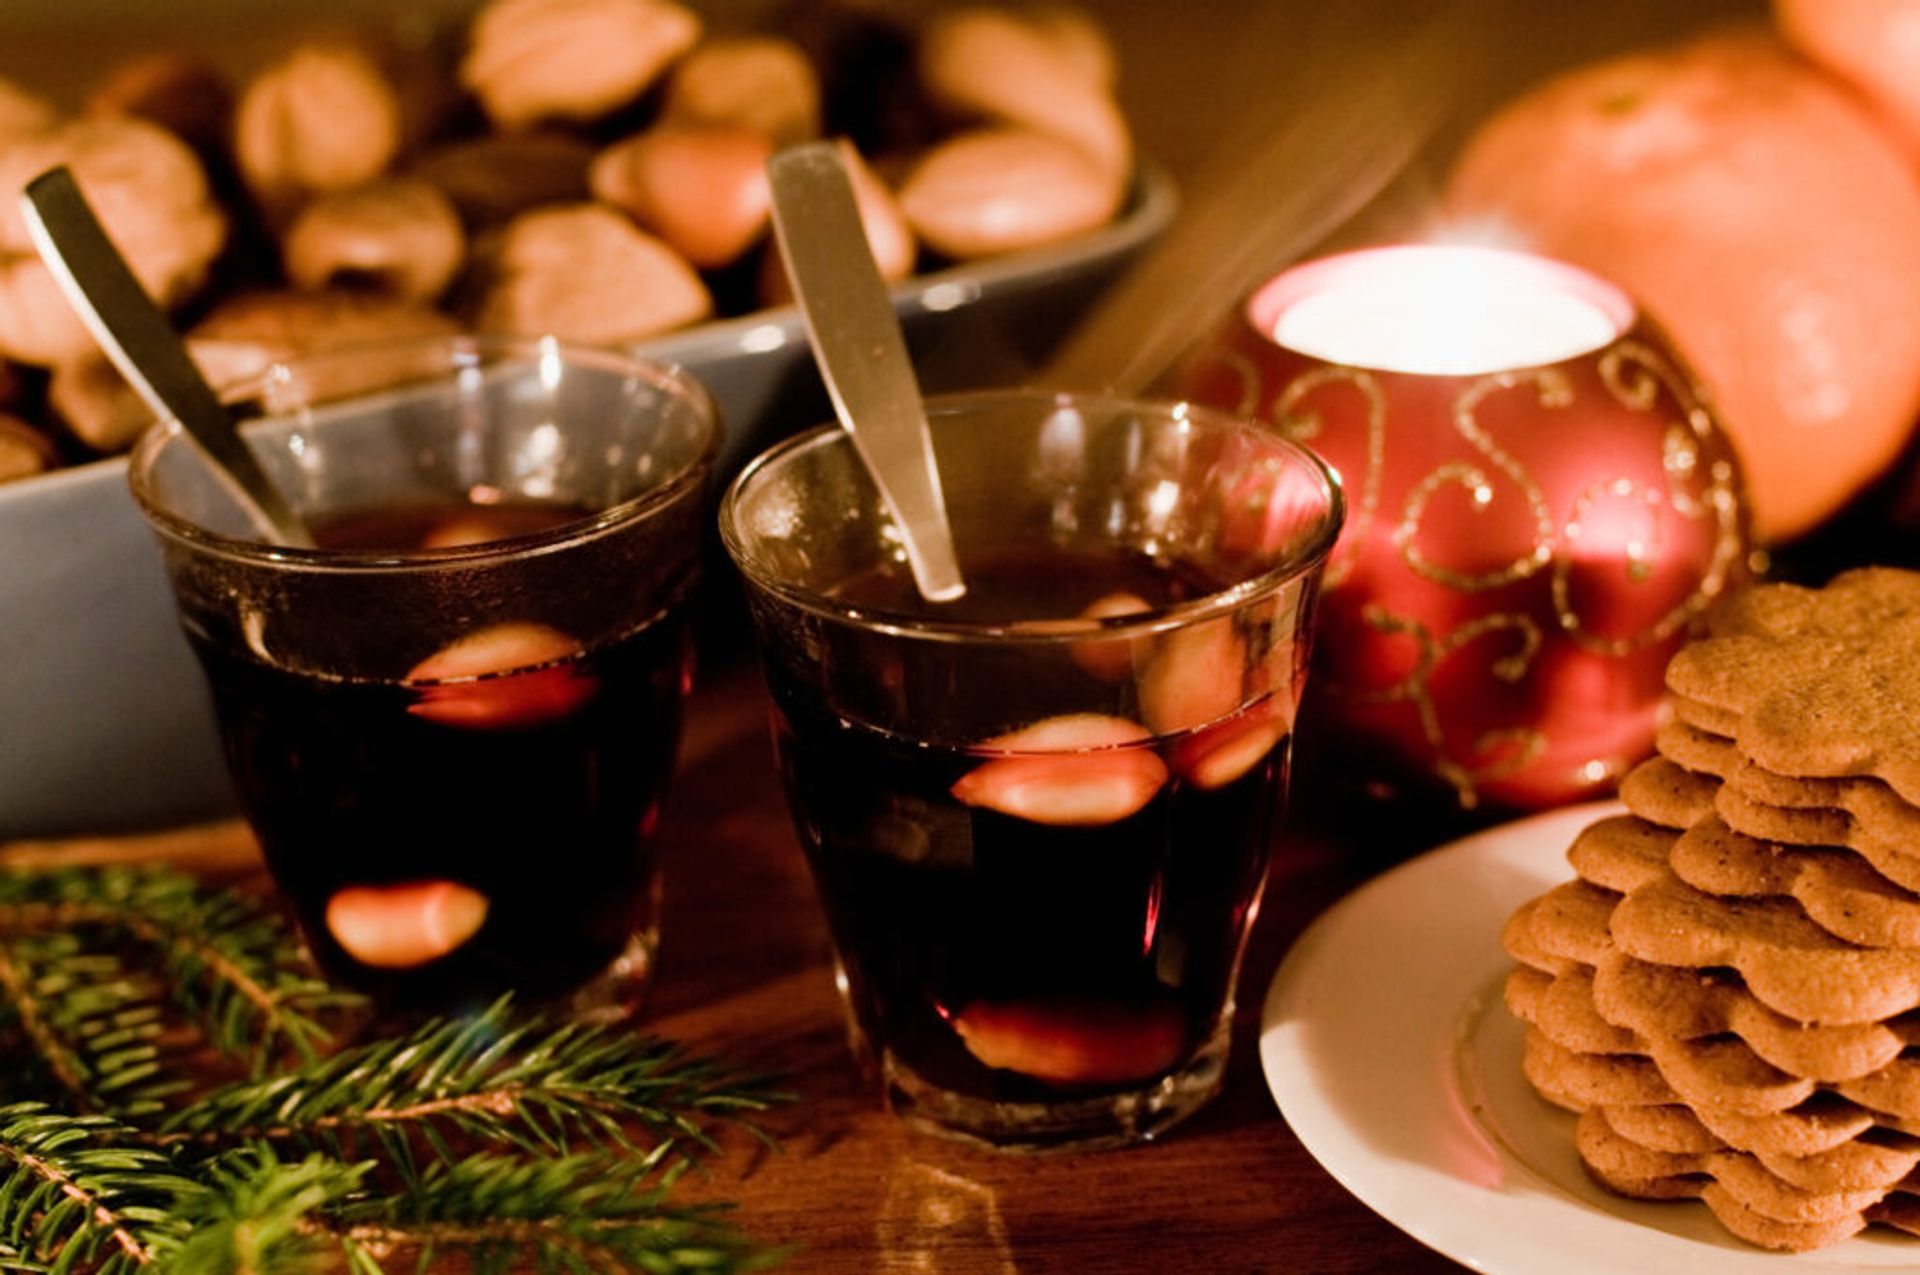 Mulled wine from Sweden called glögg is very staple for Christmas